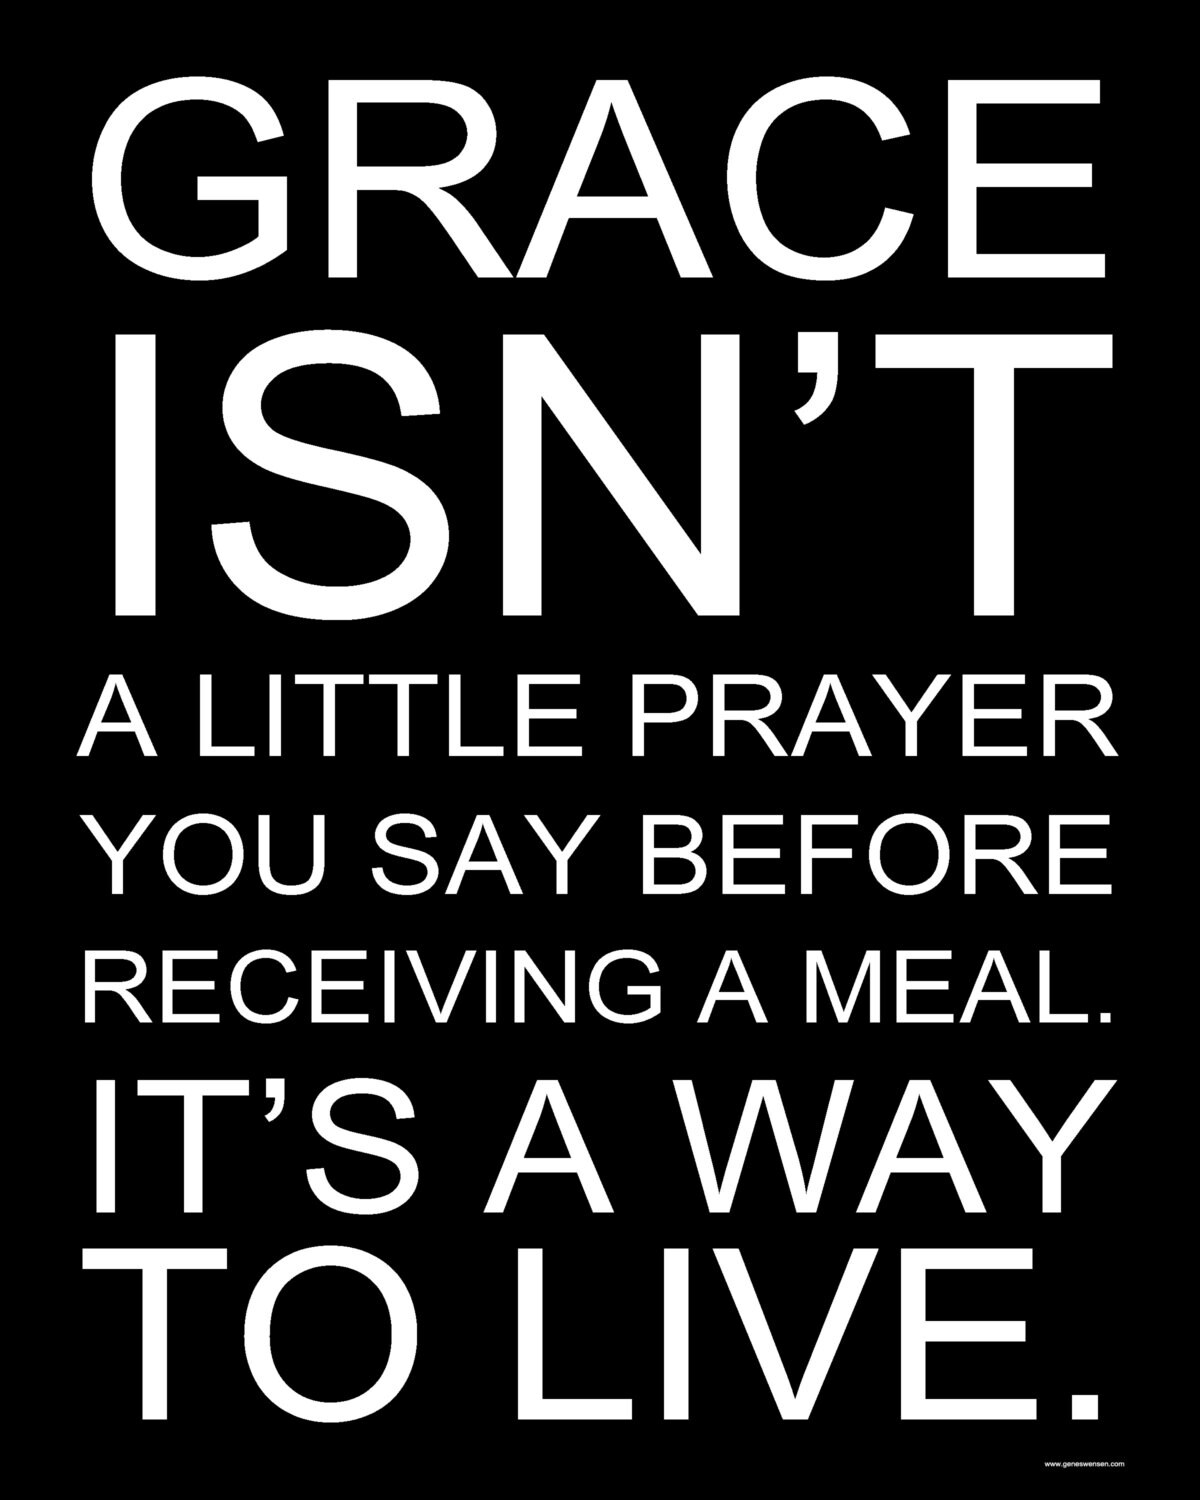 Grace Isn't A Little Prayer You Say Before A Meal. It's A Way of LIfe. - 8 x 10 - GeneSwensenStudio